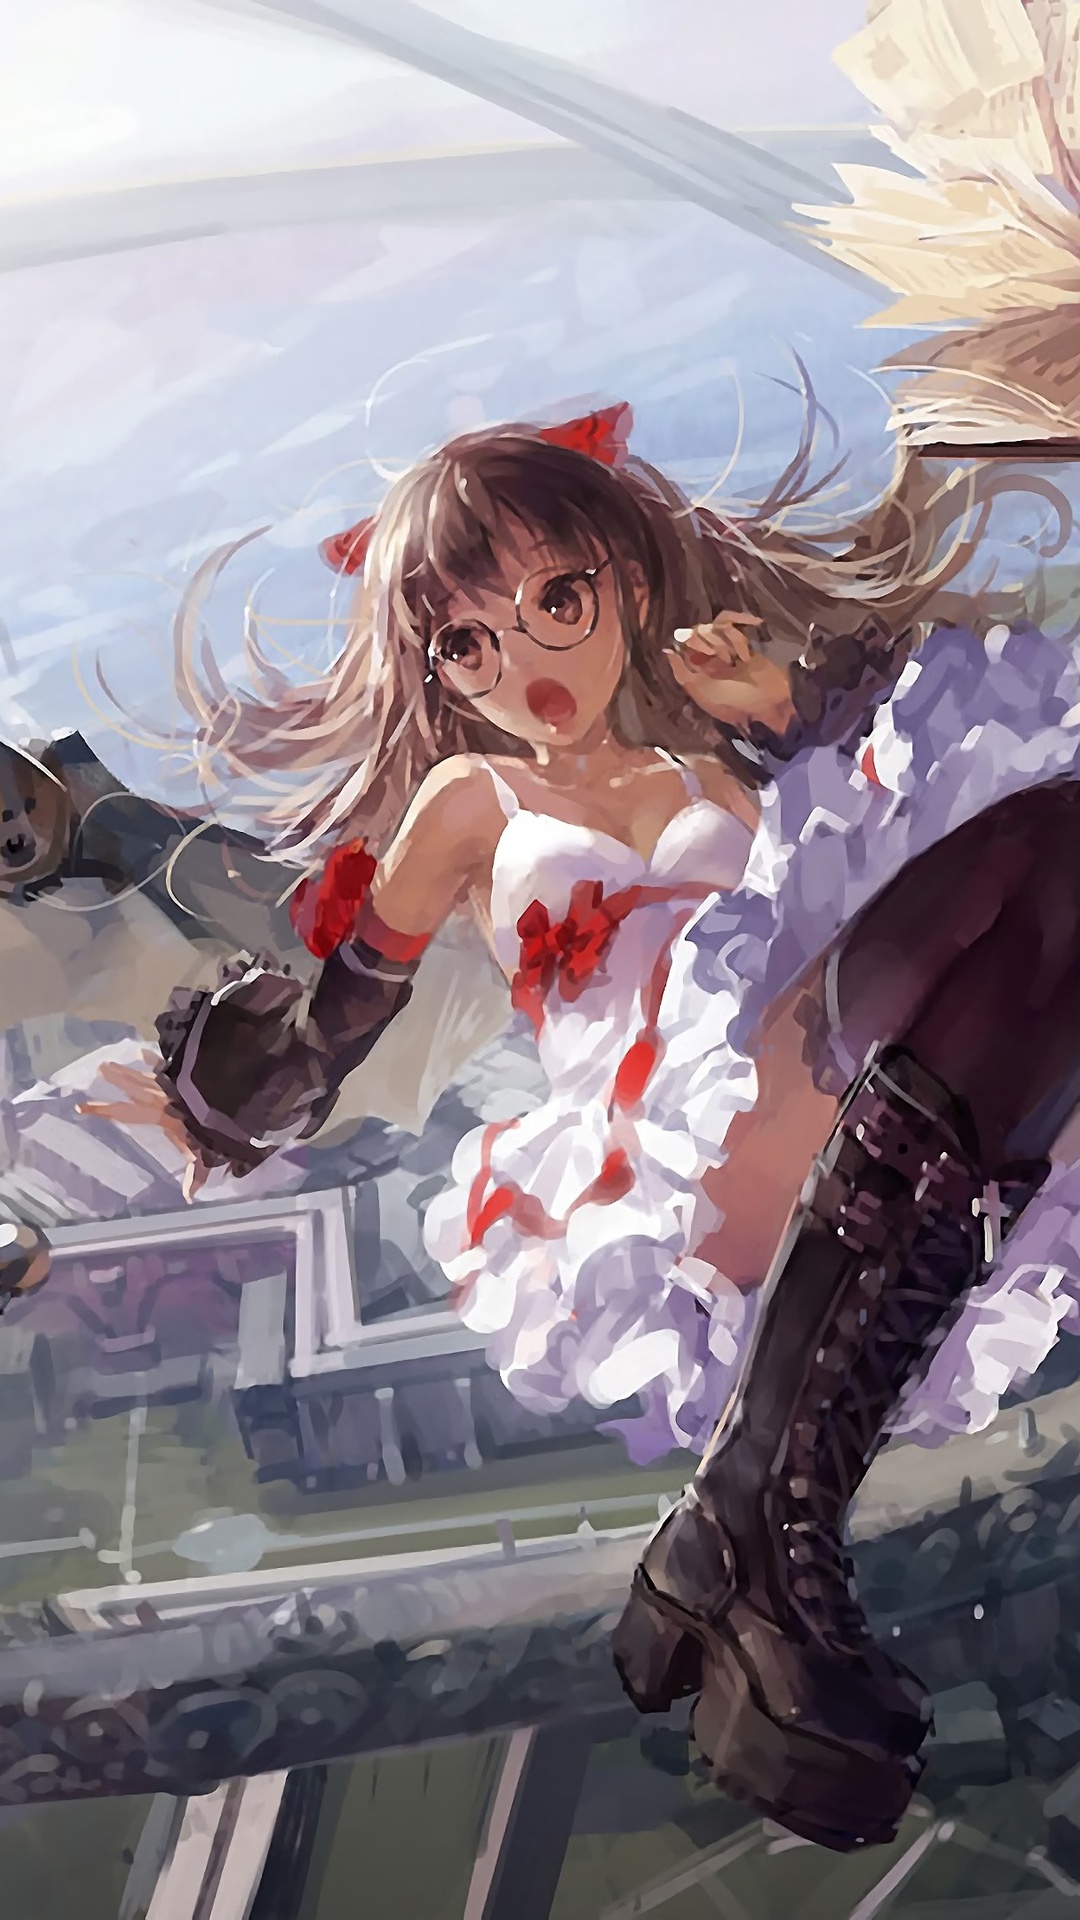 Anime girl in glasses and white dress with red elements - Angels